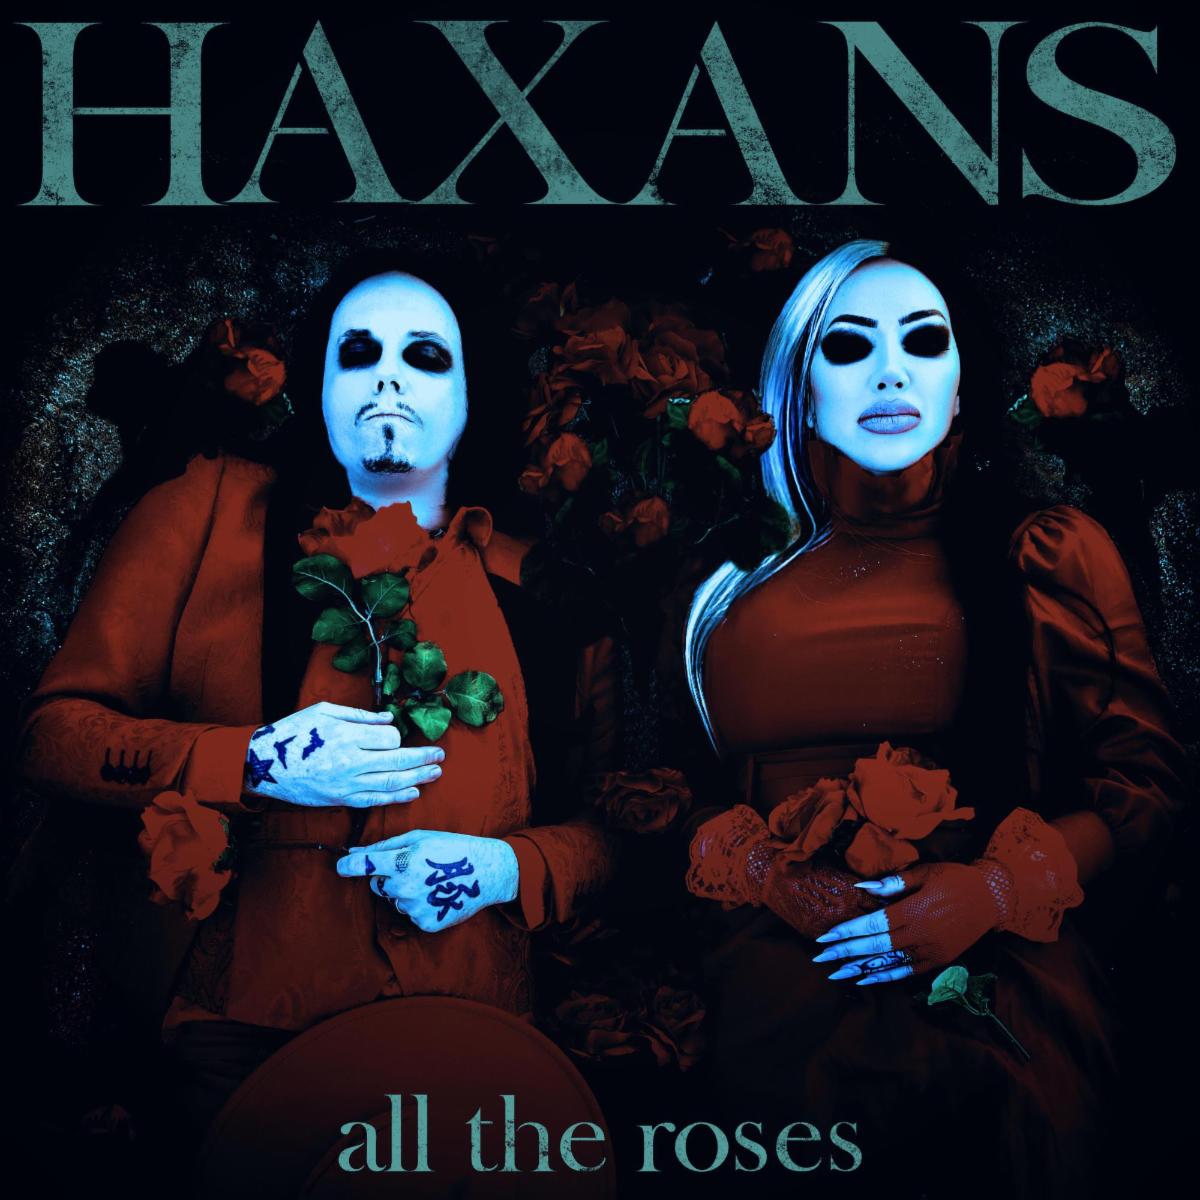 THE HAXANS Release New Track And Music Video For "All The Roses" Today